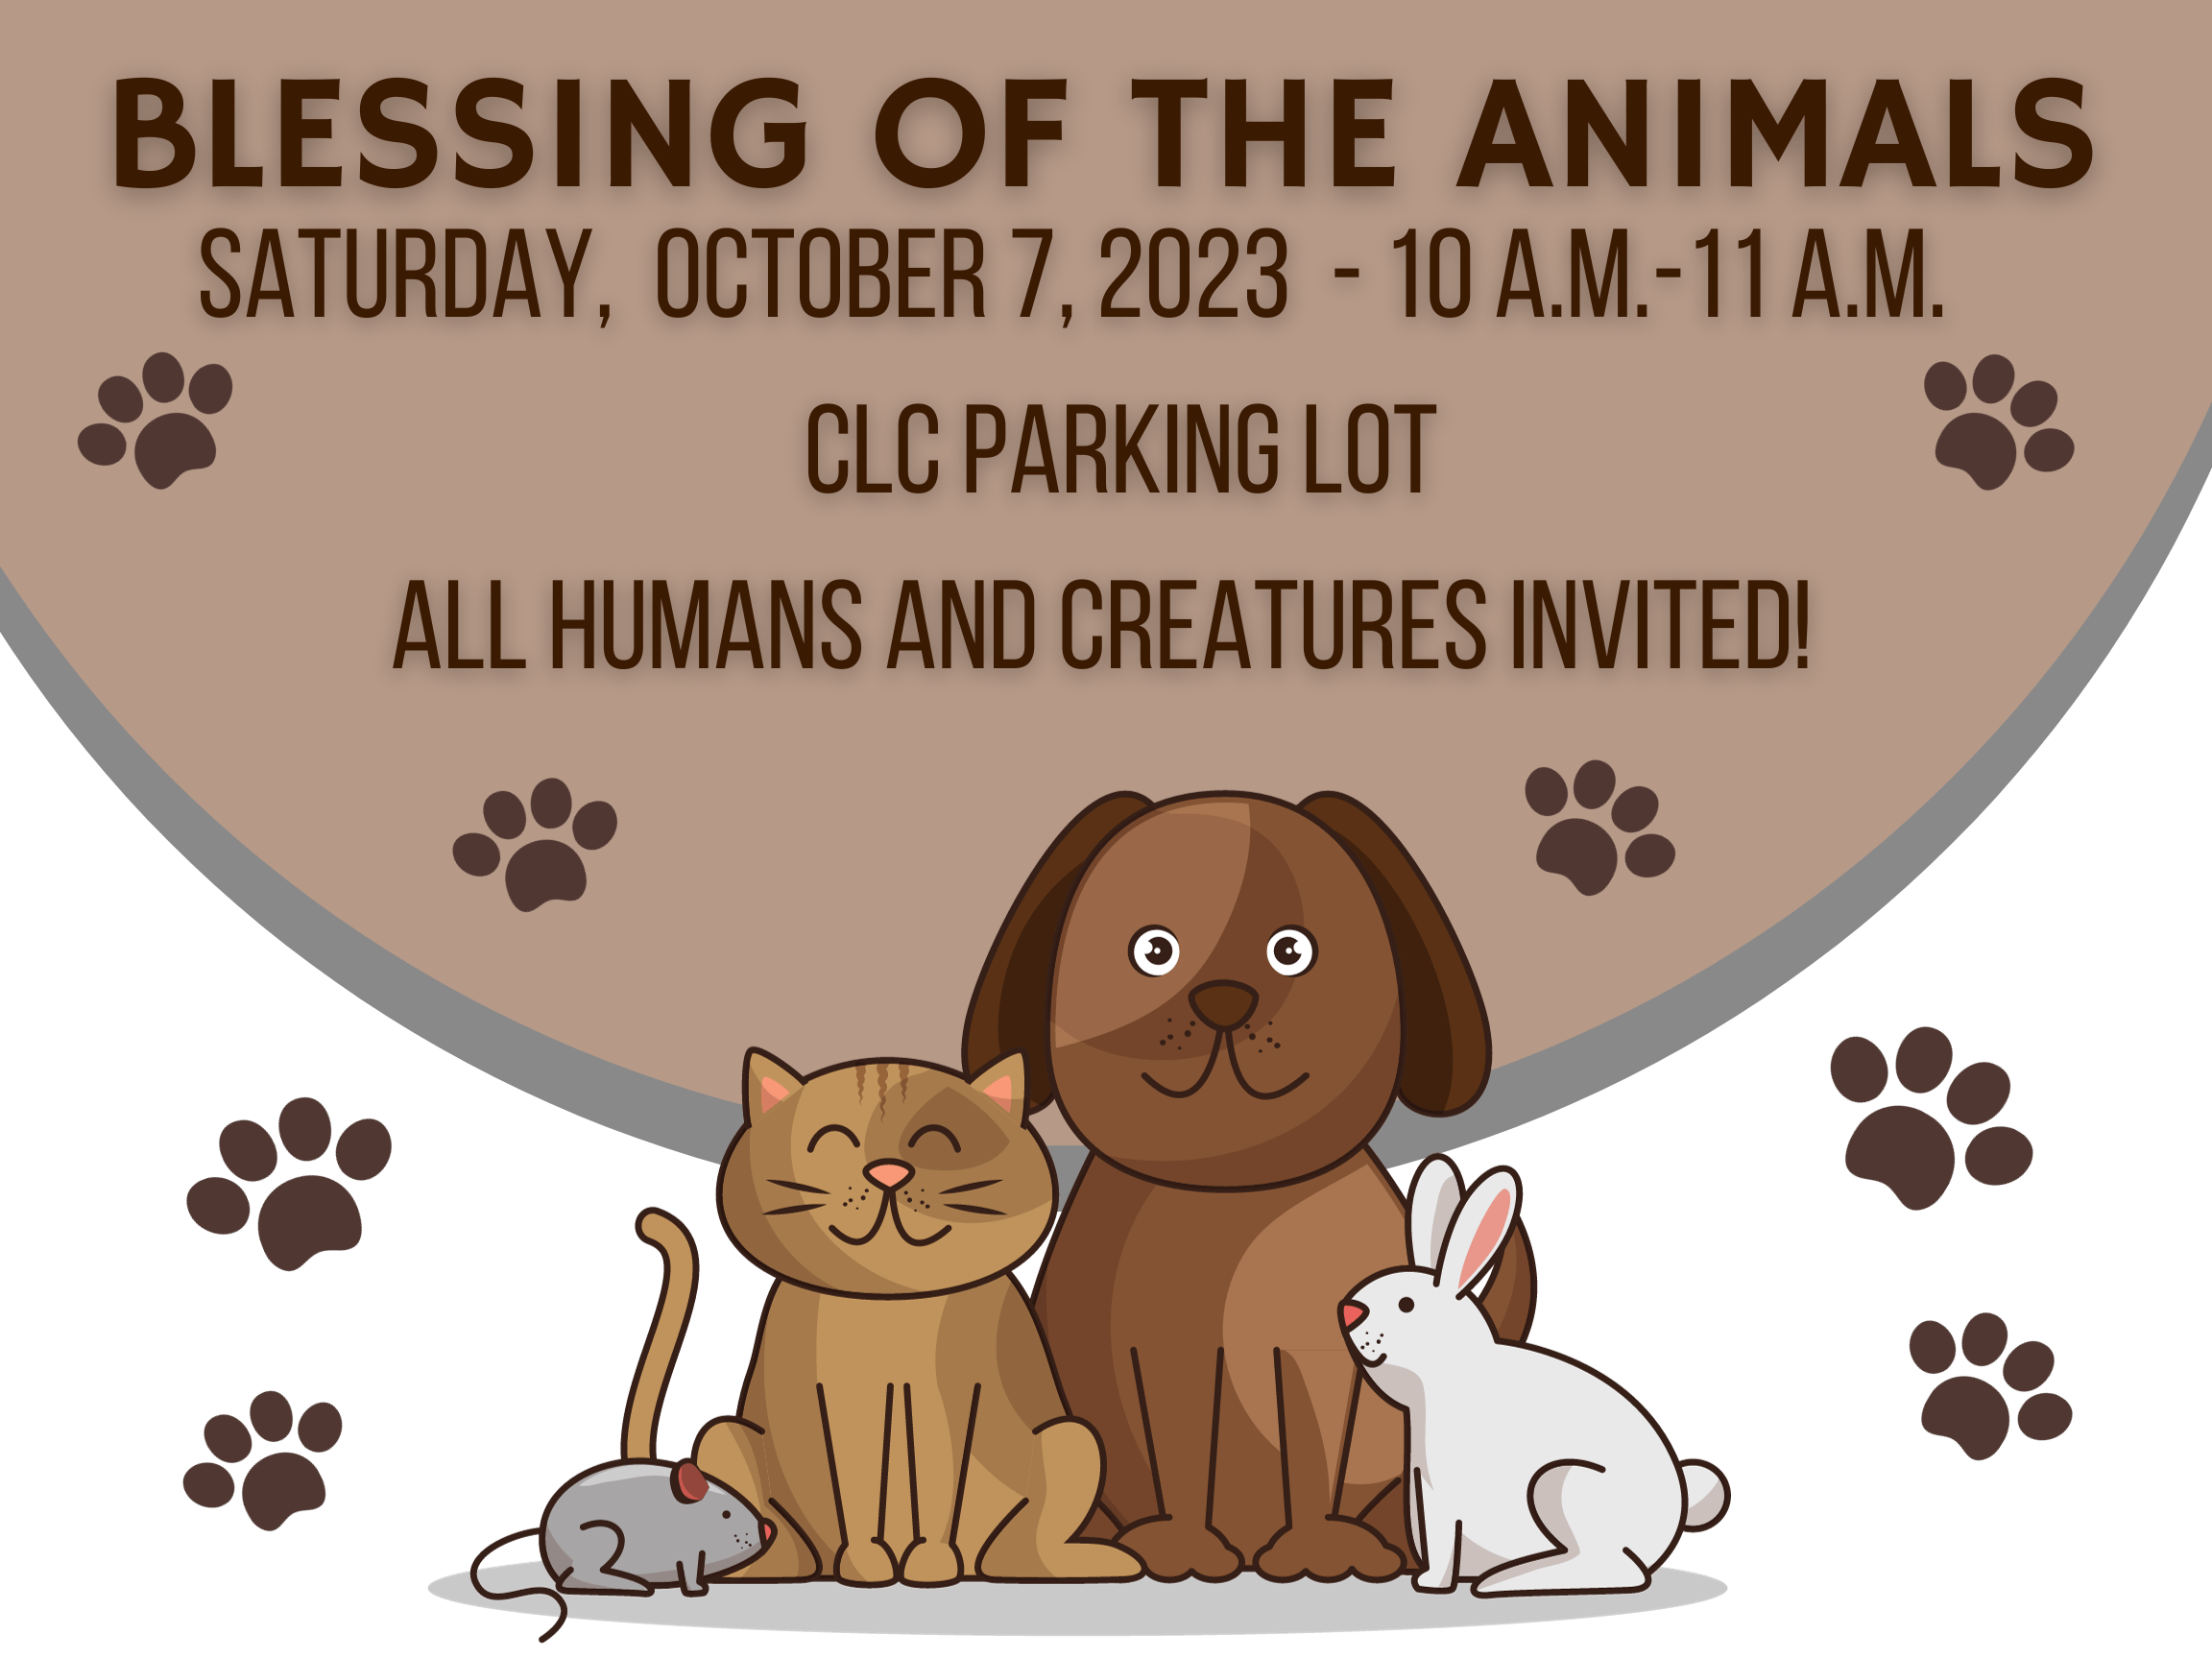 Blessing of the Animals- Saturday, October 7, 2023